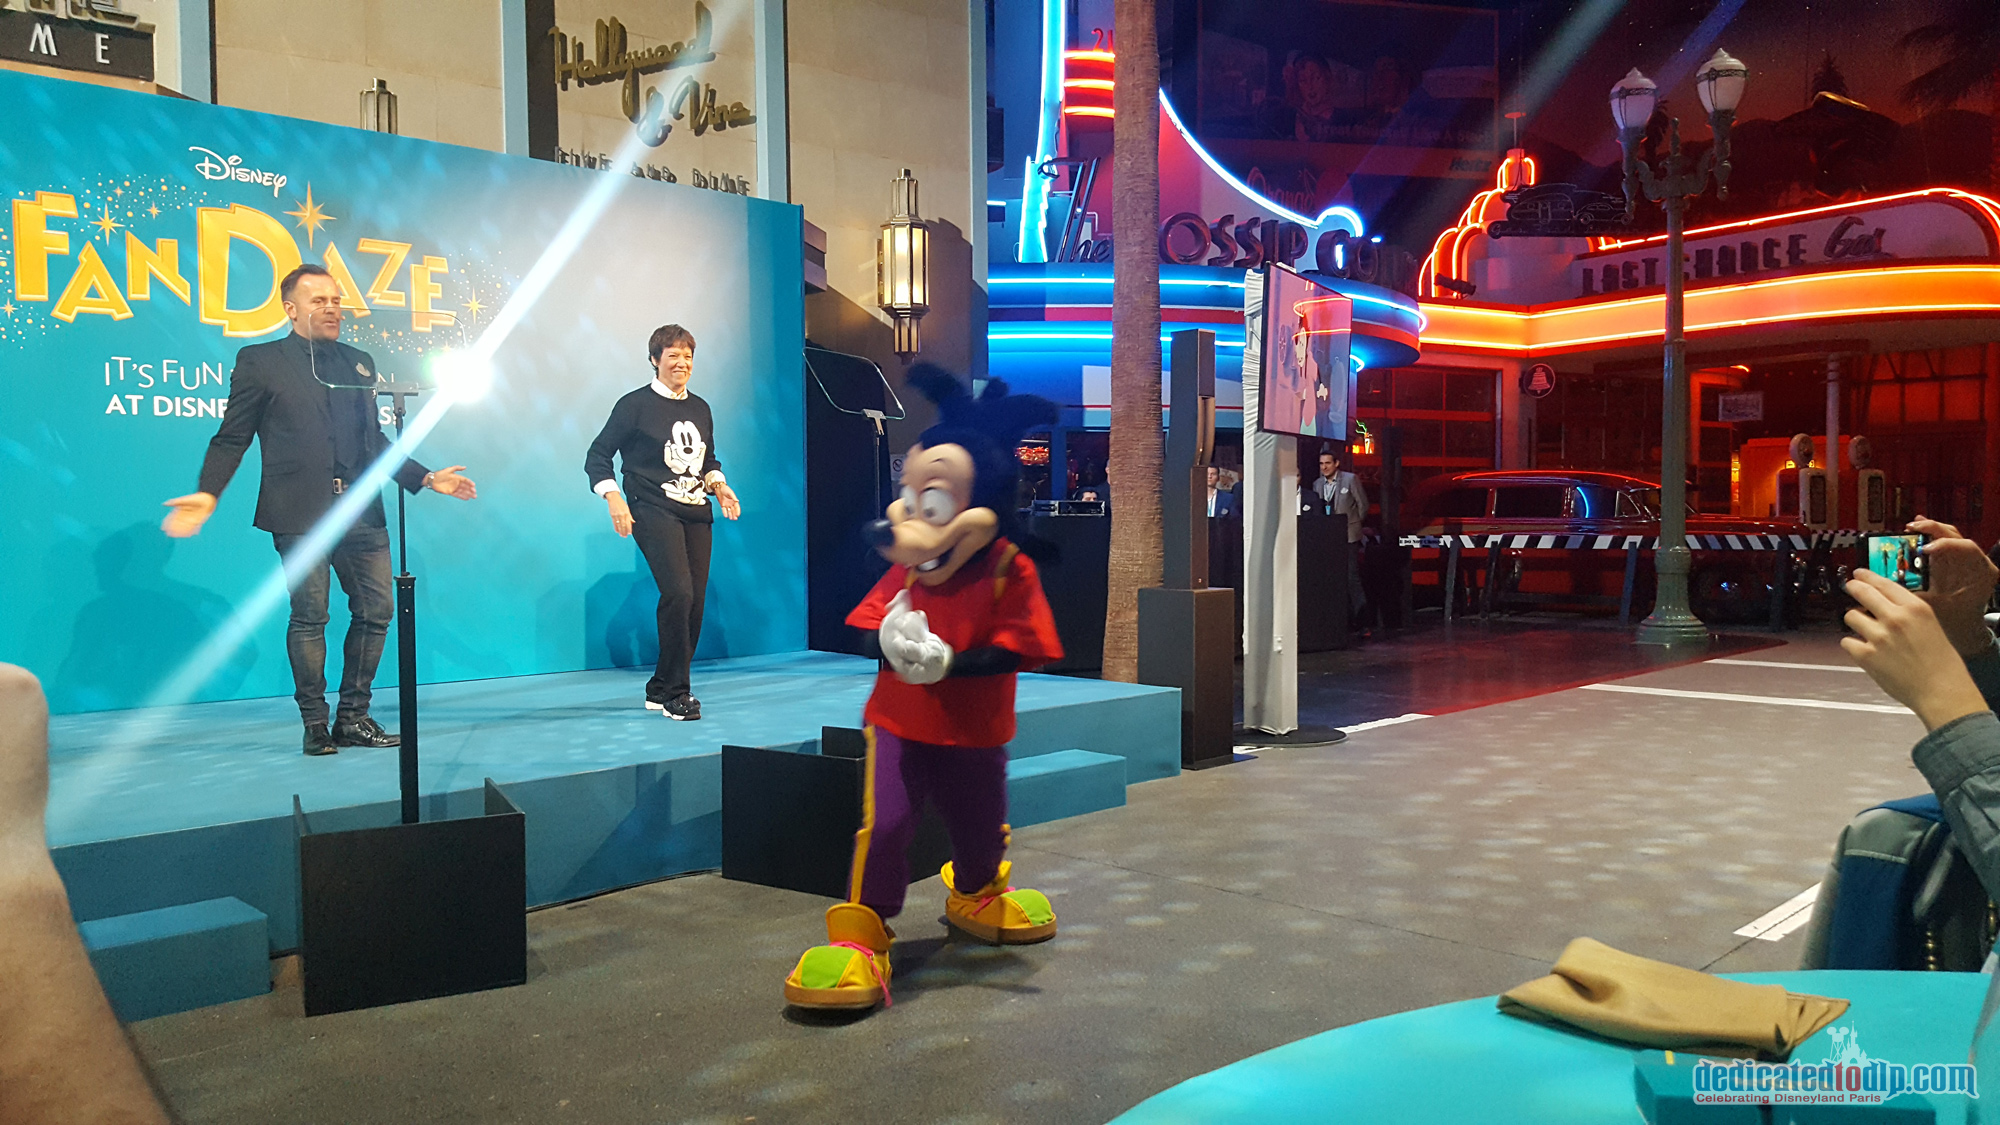 FULL Max Live! Gettin' Goofy With It Show at Disney FanDaze, Disneyland  Paris with Many Characters! 